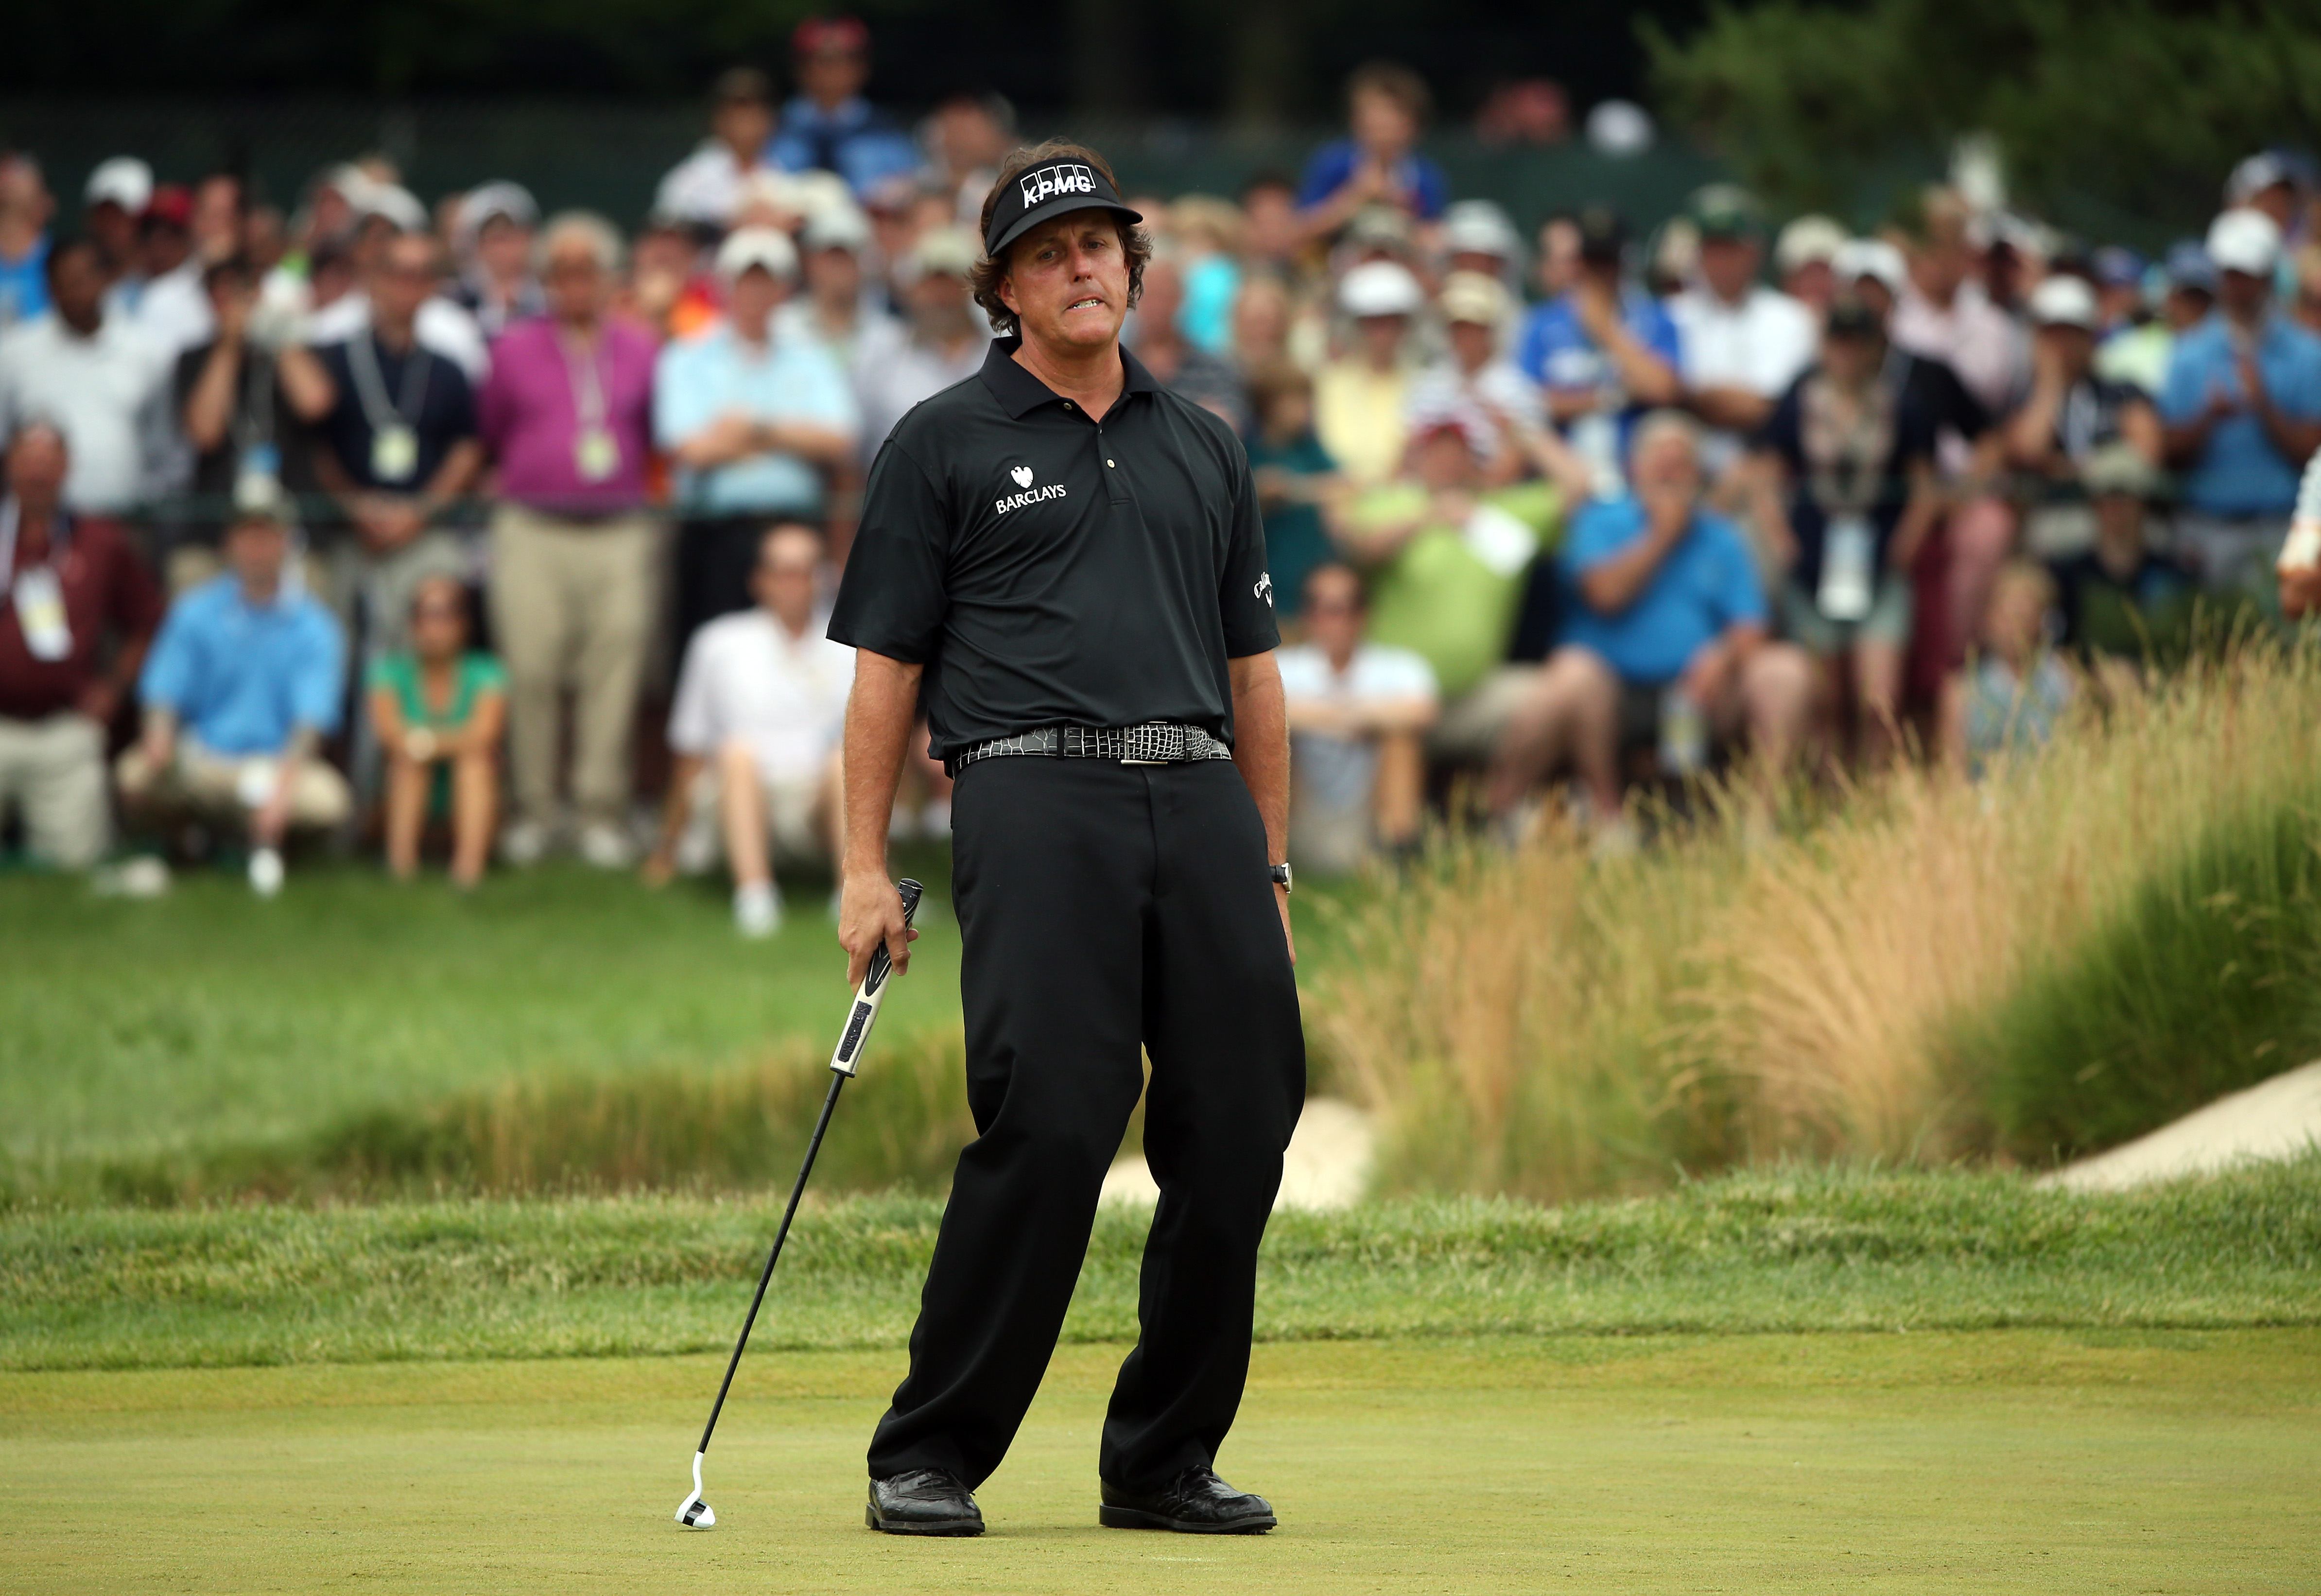 Three-putts cost Mickelson dear at Merion (Photo: Getty Images)